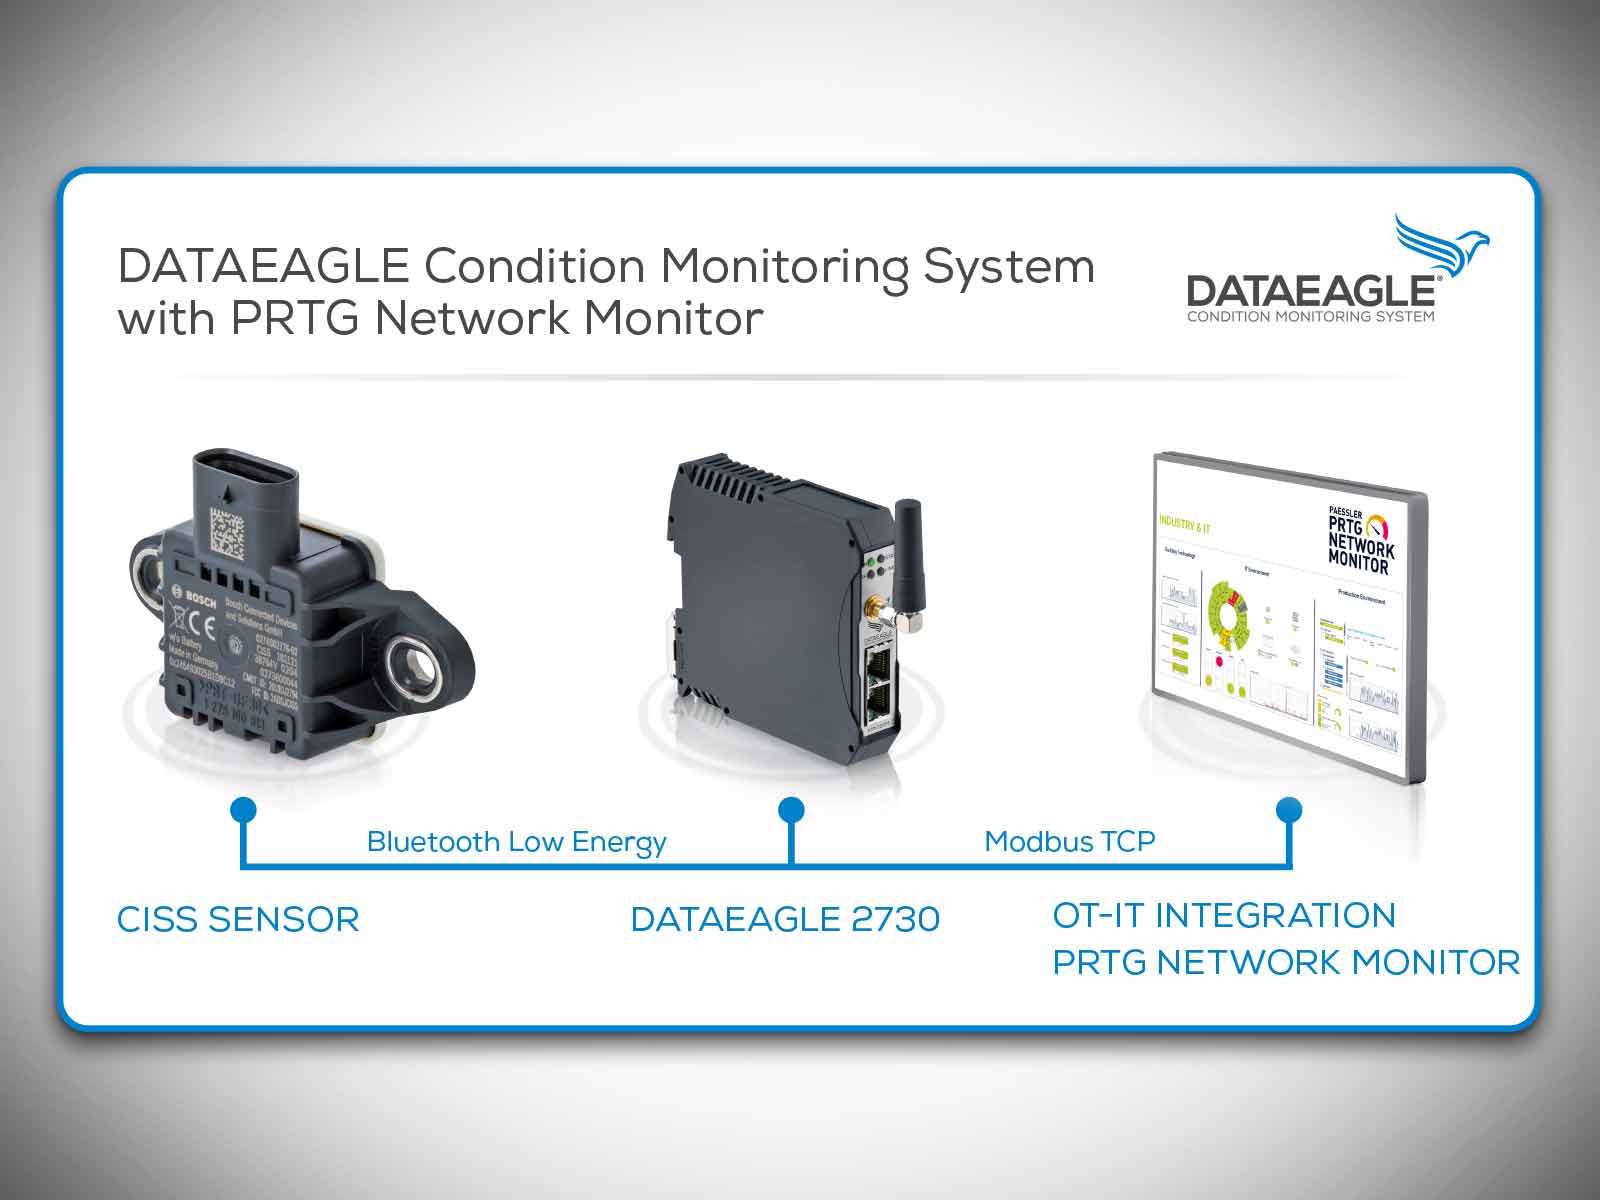 Dataeagle conition Monitoring system PRTG Network Monitor